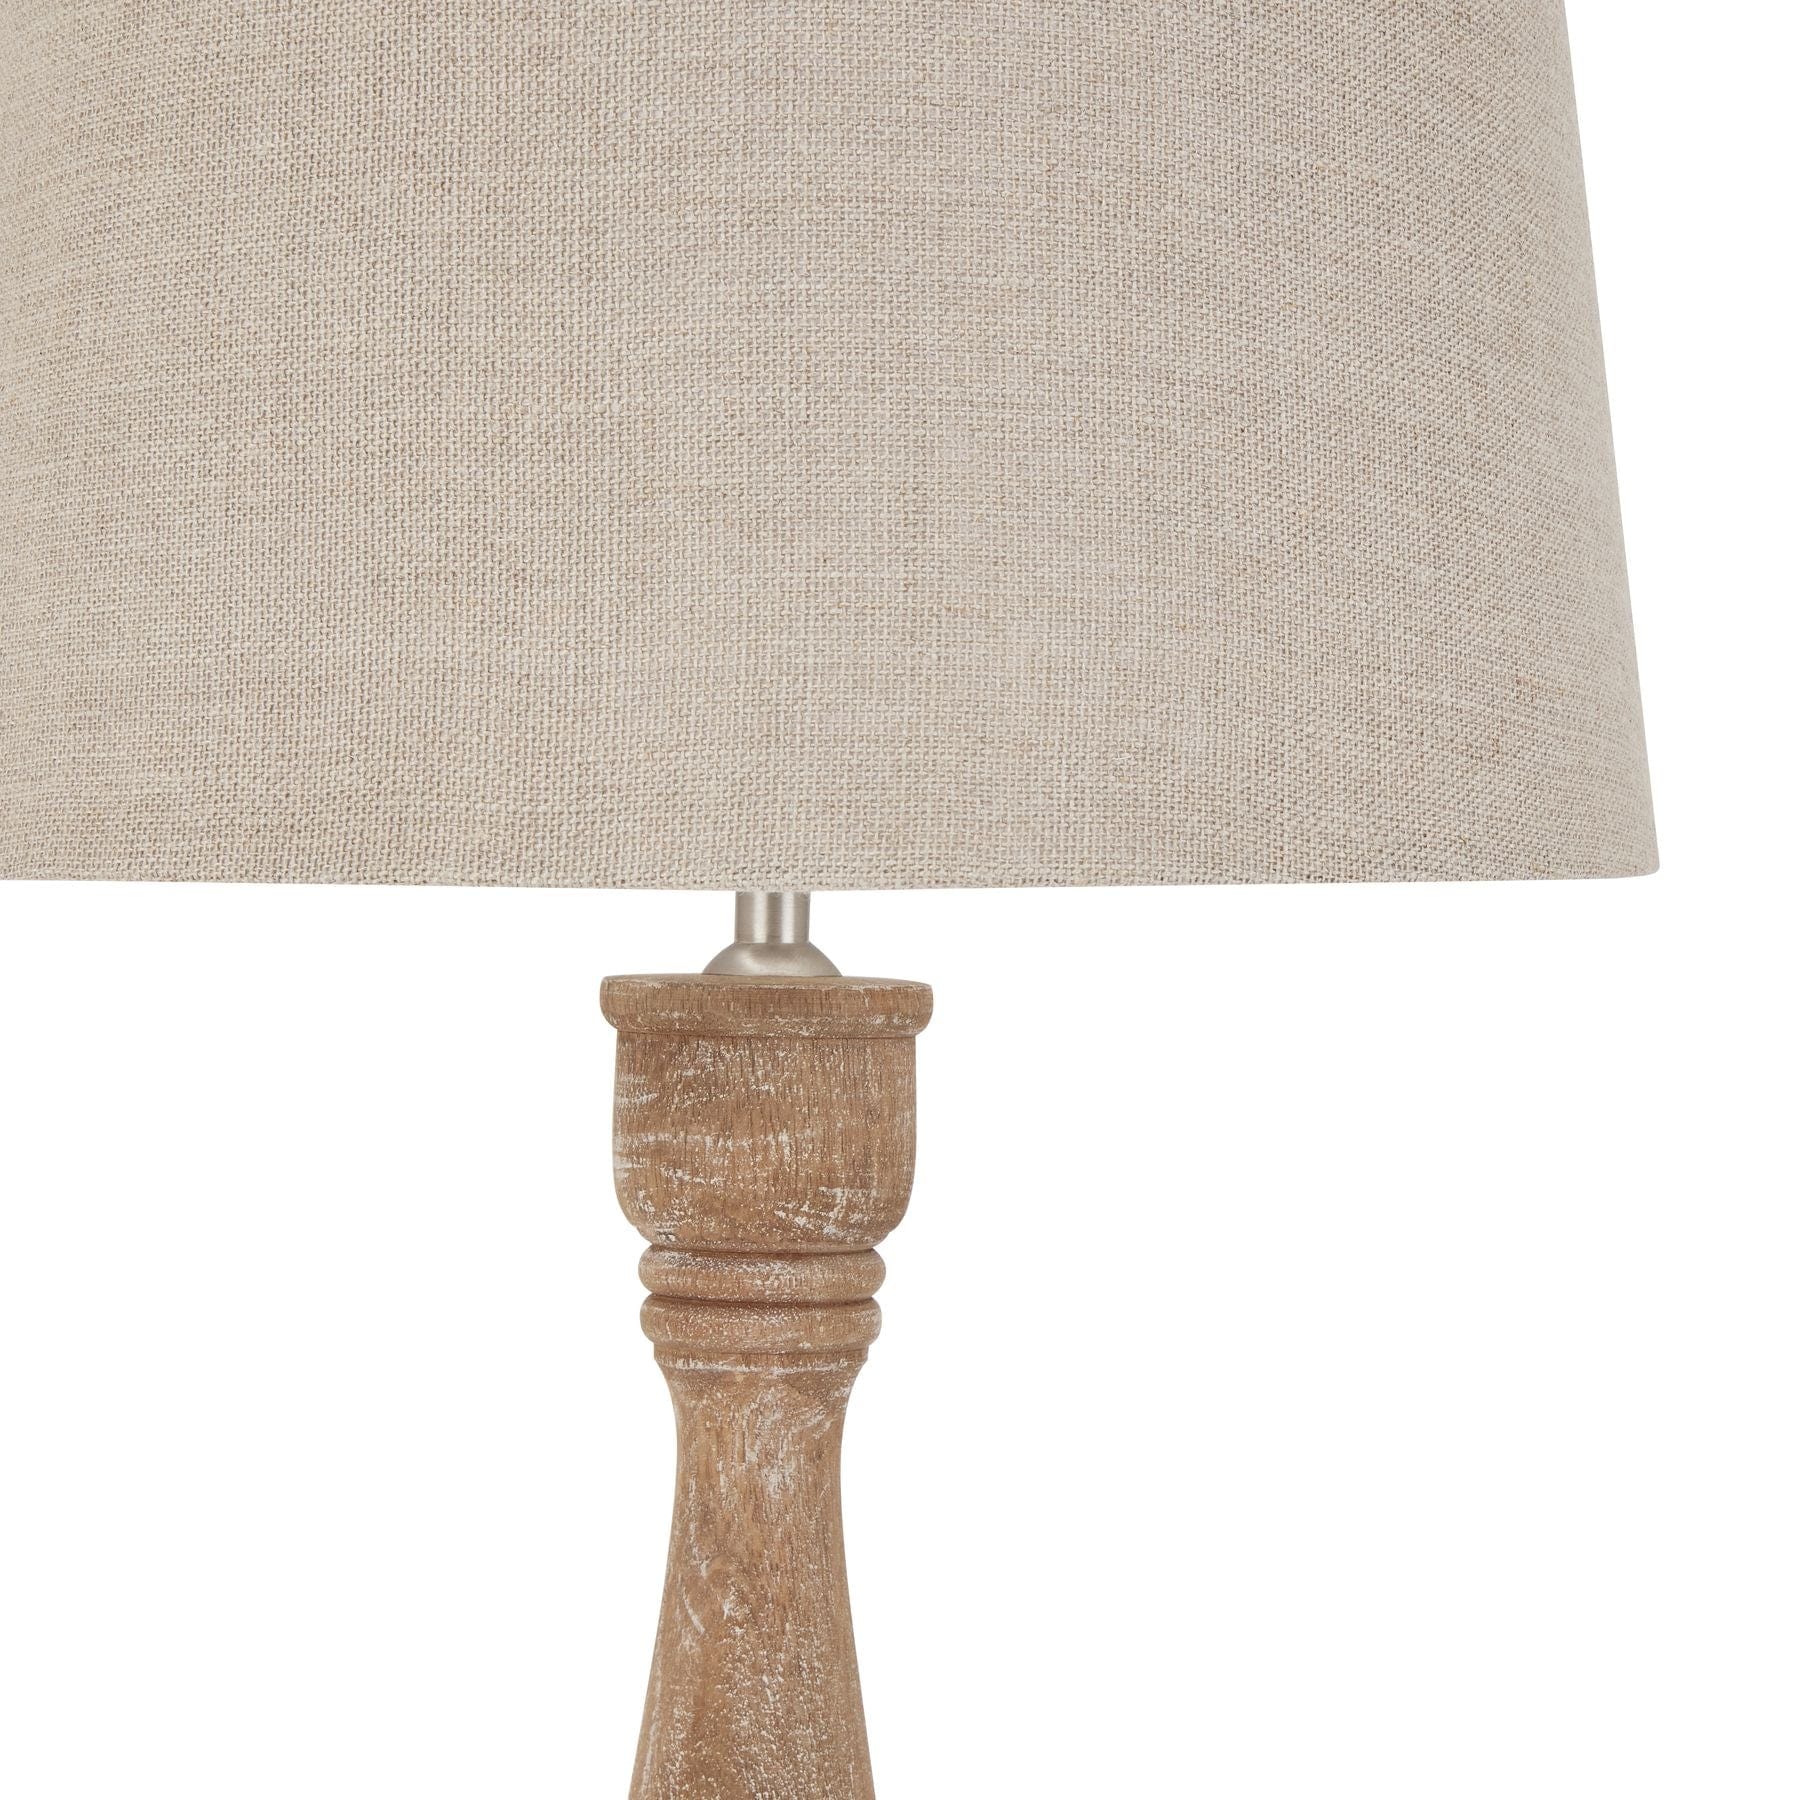 Hill Interiors Table Lamp Delaney Natural Wash Candlestick Lamp With Linen Shade